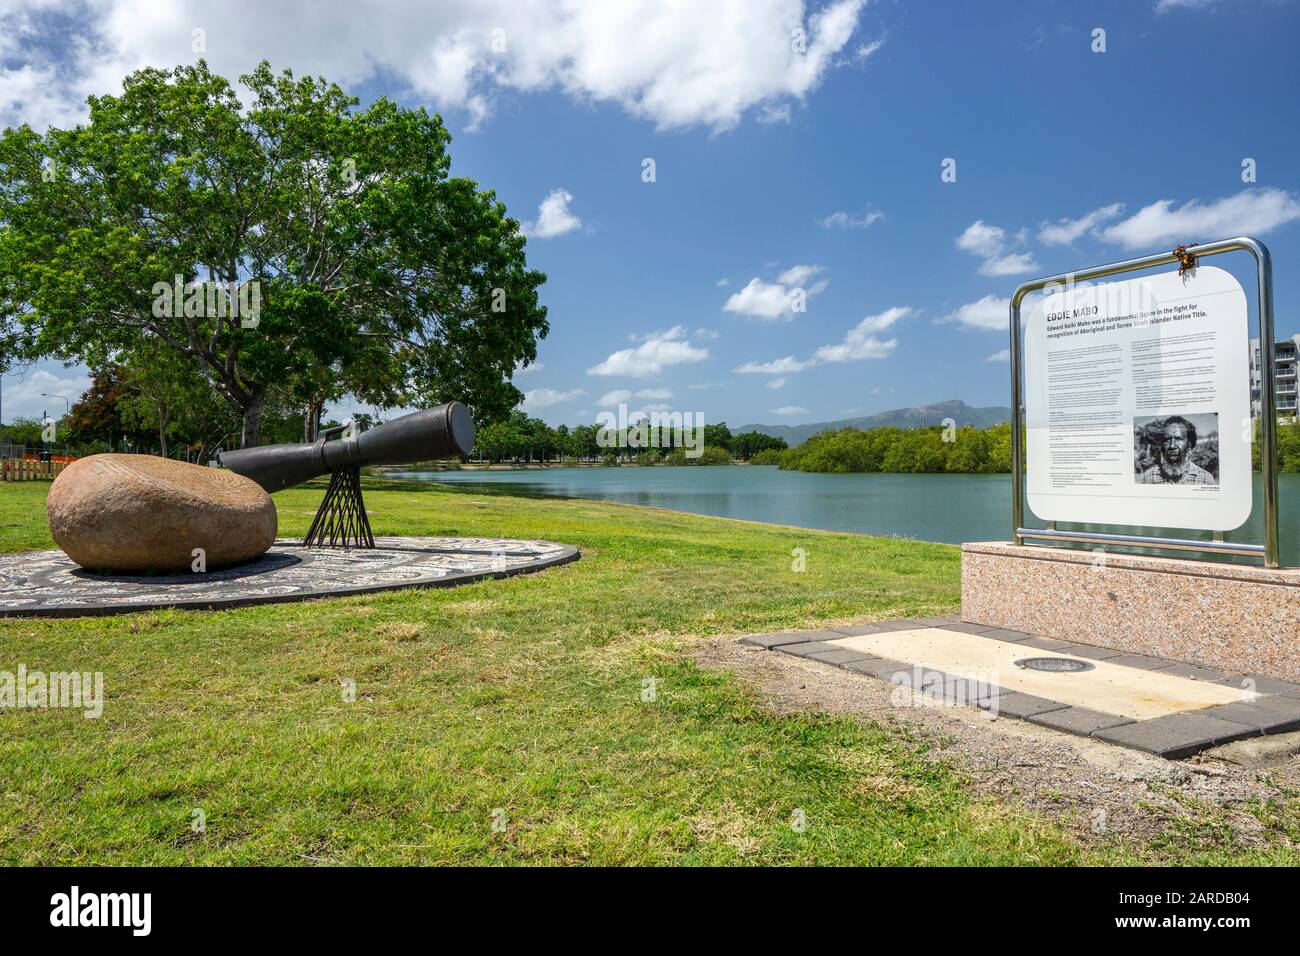 Sculpture to commemorate Eddie Koiko Mabo and the Mabo Decision. Central park on banks of Ross River, Townsville Queensland, Stock Photo